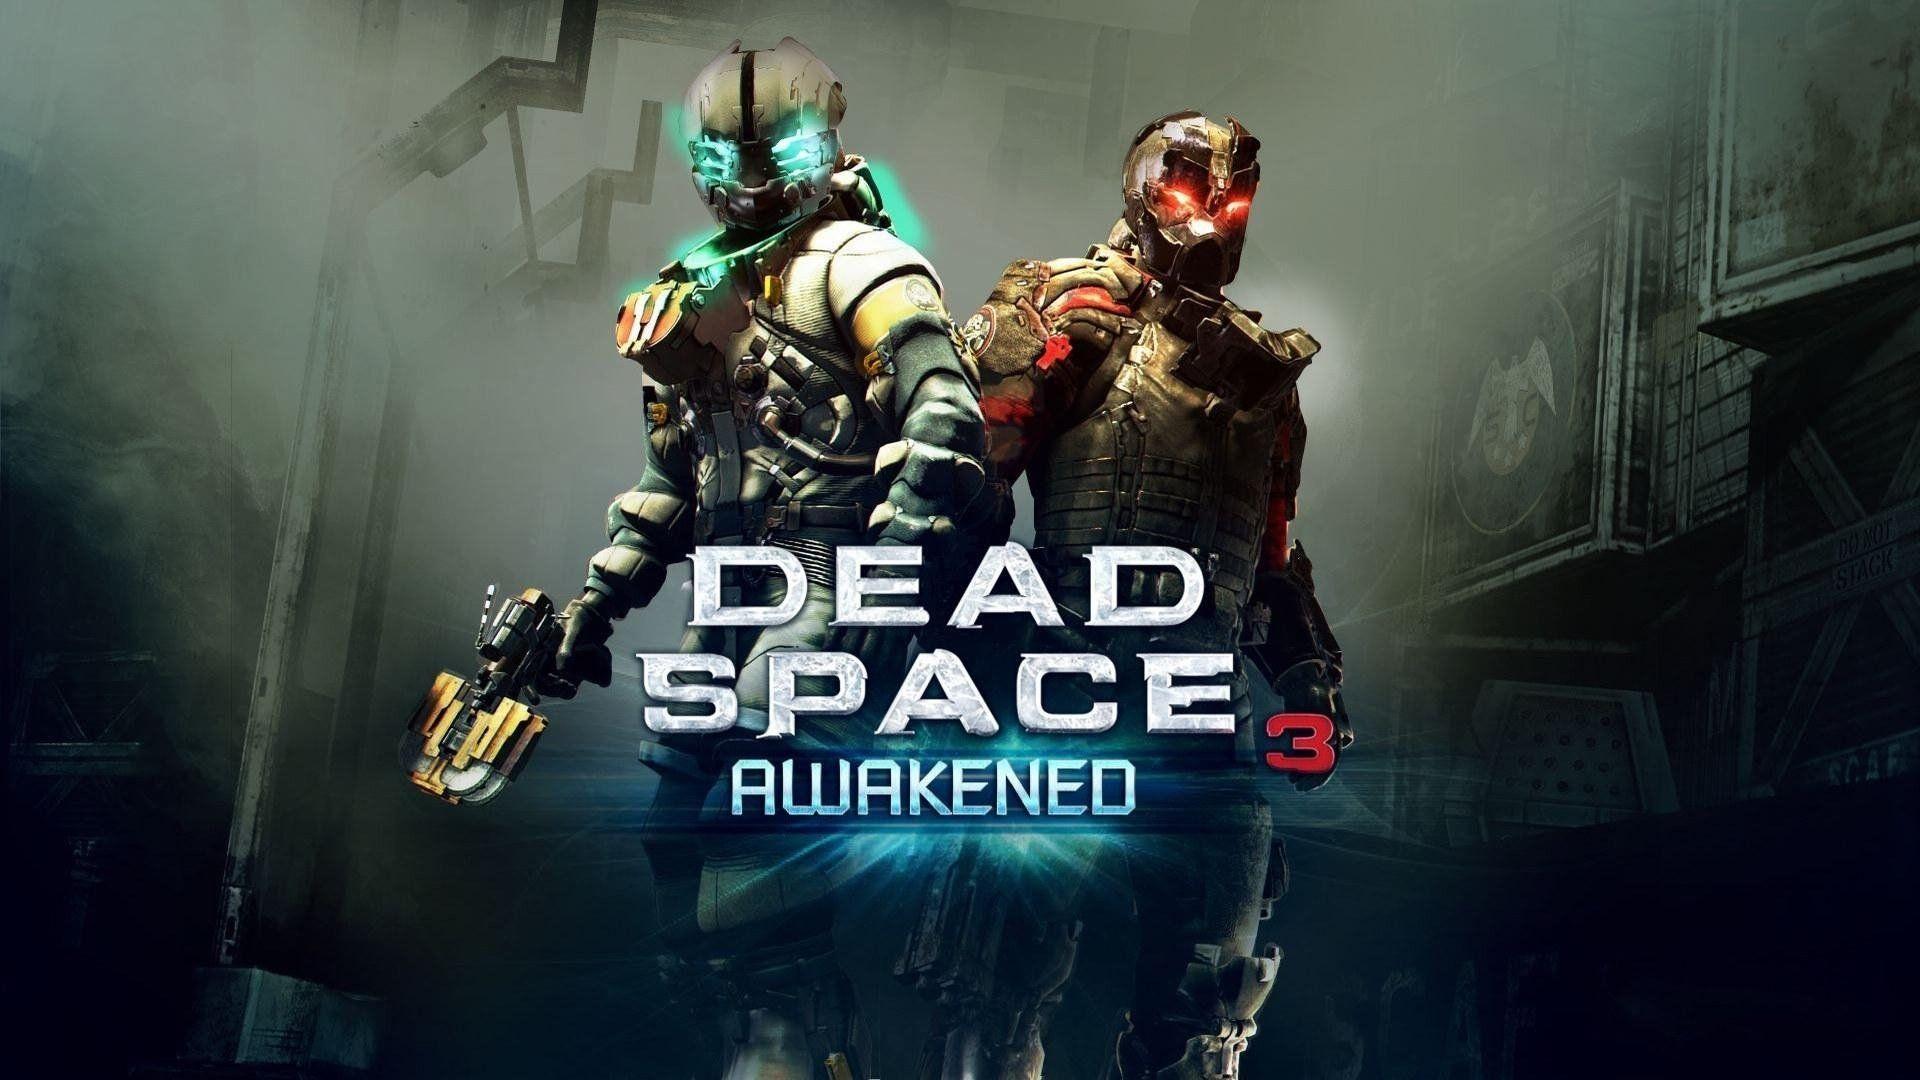 Dead Space 3 Wallpapers Top Free Dead Space 3 Backgrounds Wallpaperaccess